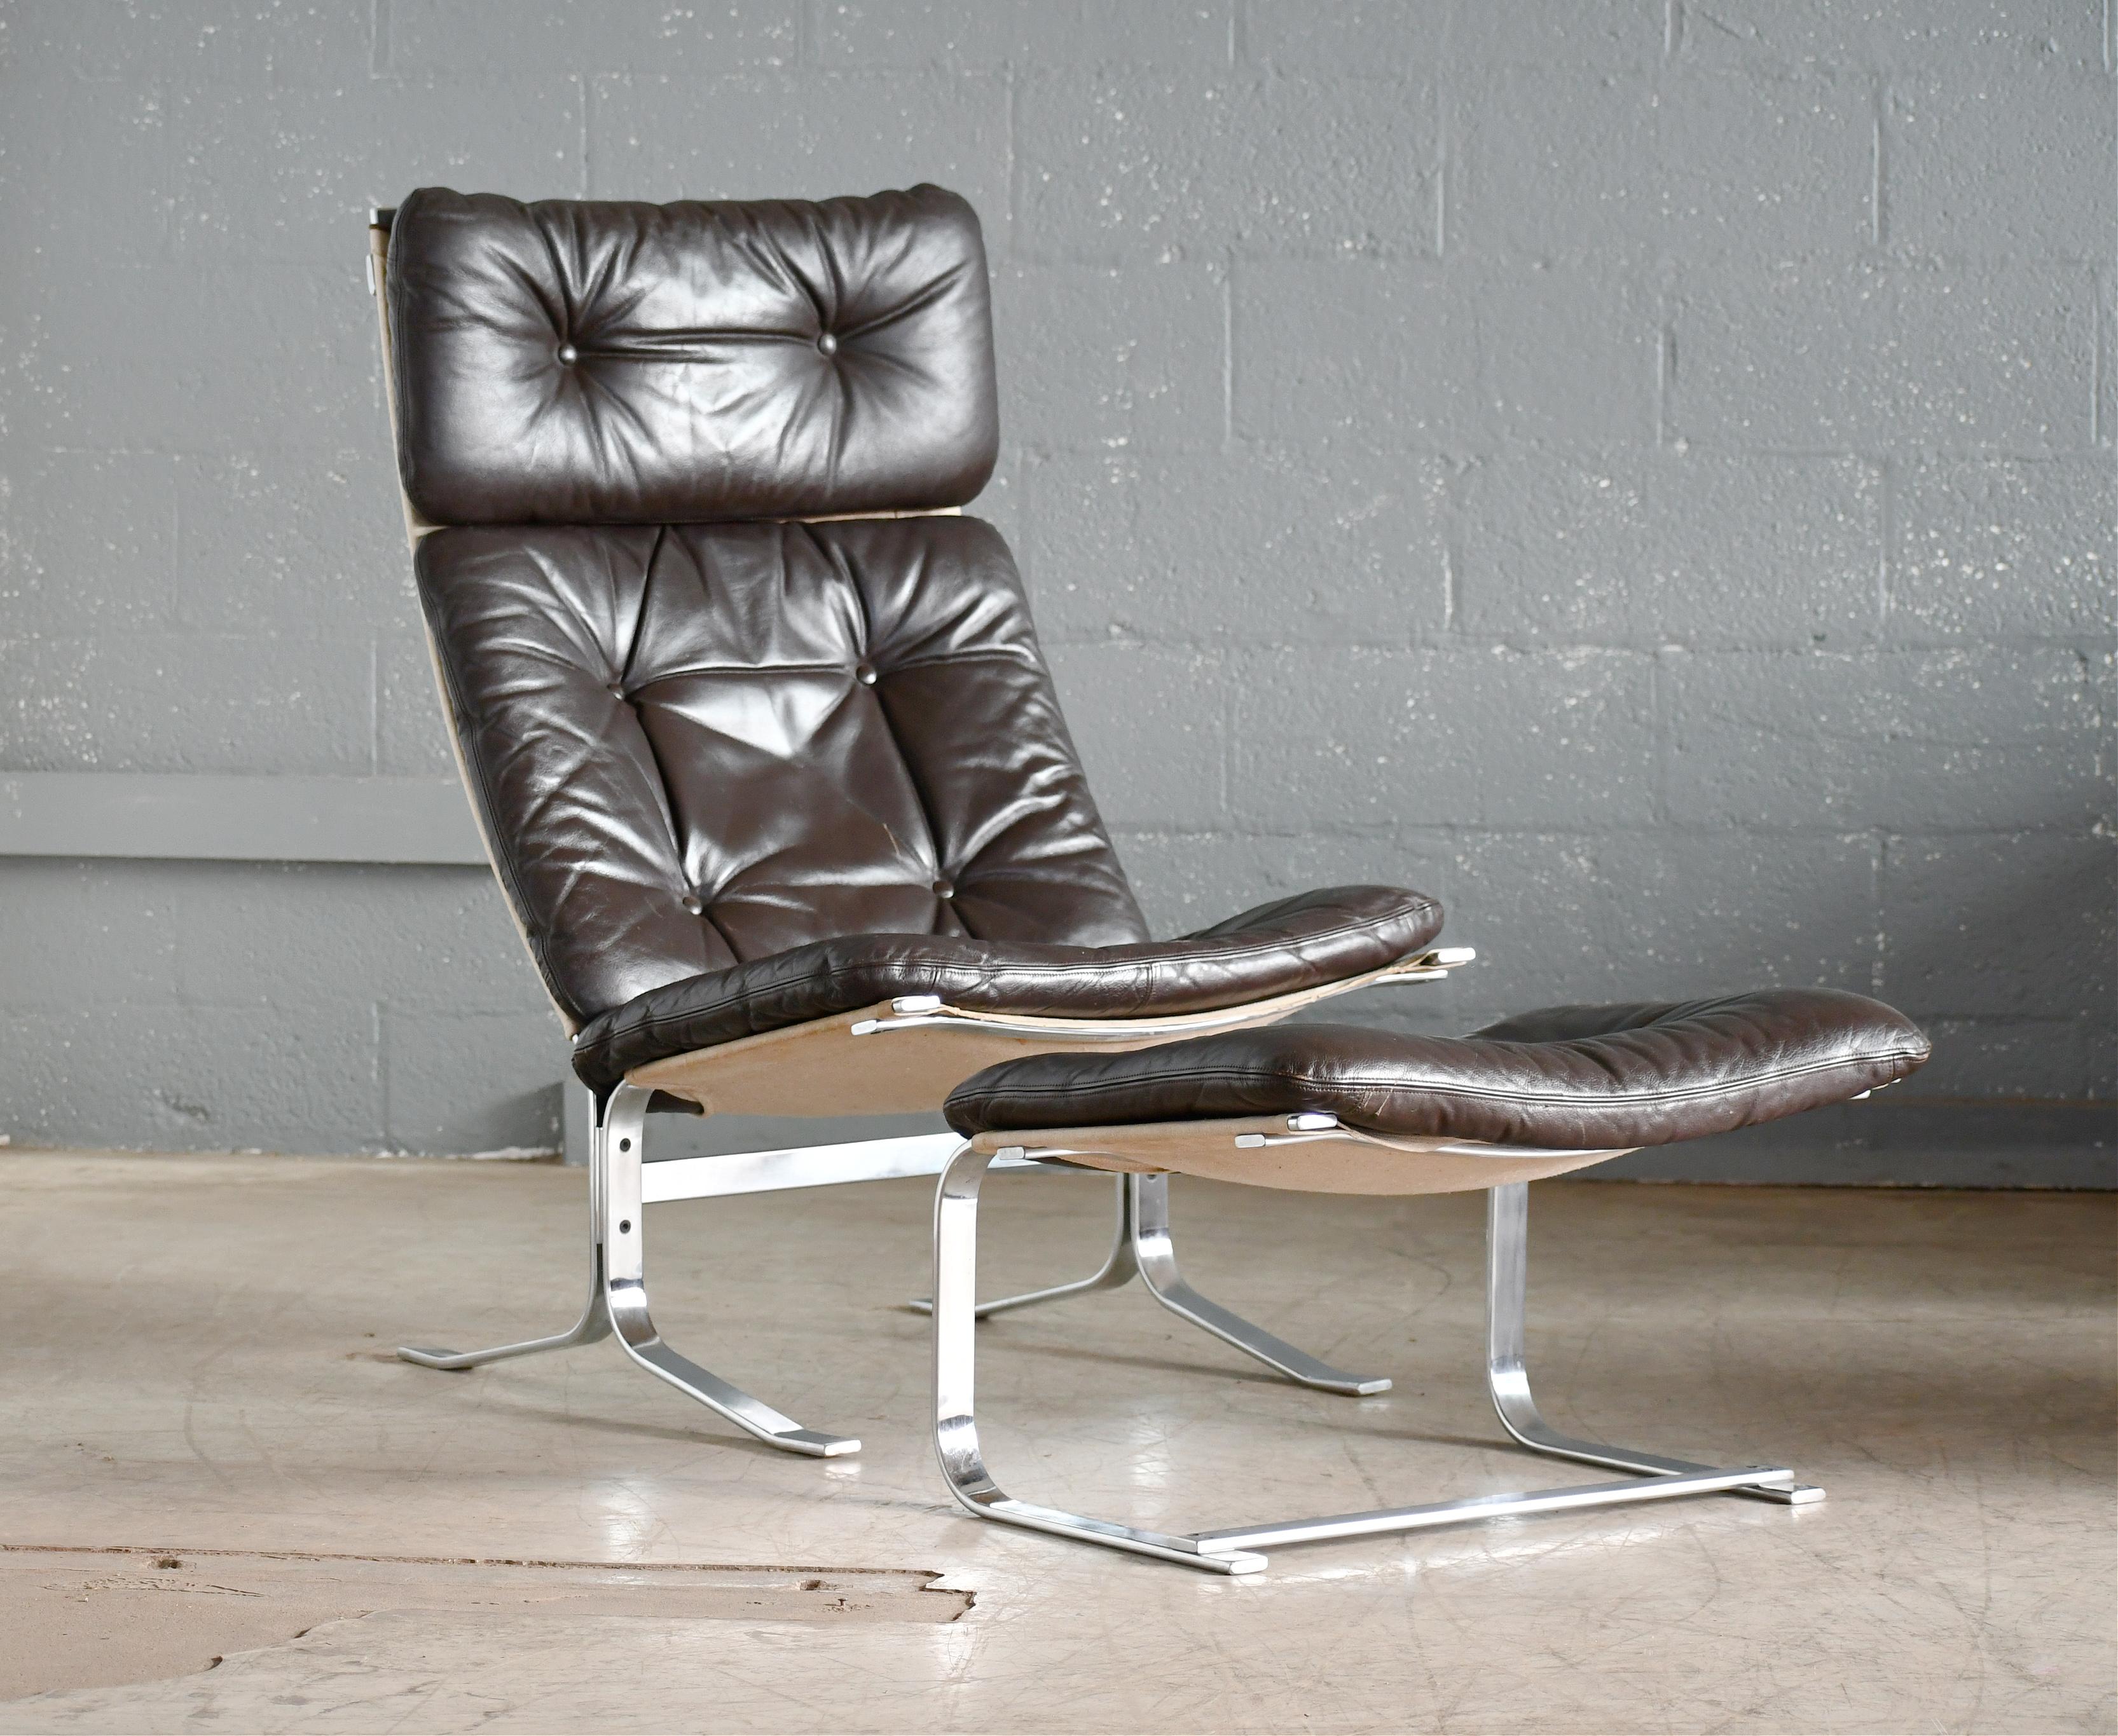 Beautiful easy chair in the style and tradition of Erik Jorgensen and Poul Kjaerholm with supple leather and cushions on a heavy gauge base of polished steel. Very reminiscent of the production quality seen in Erik Jorgensen's famous Corona chair.